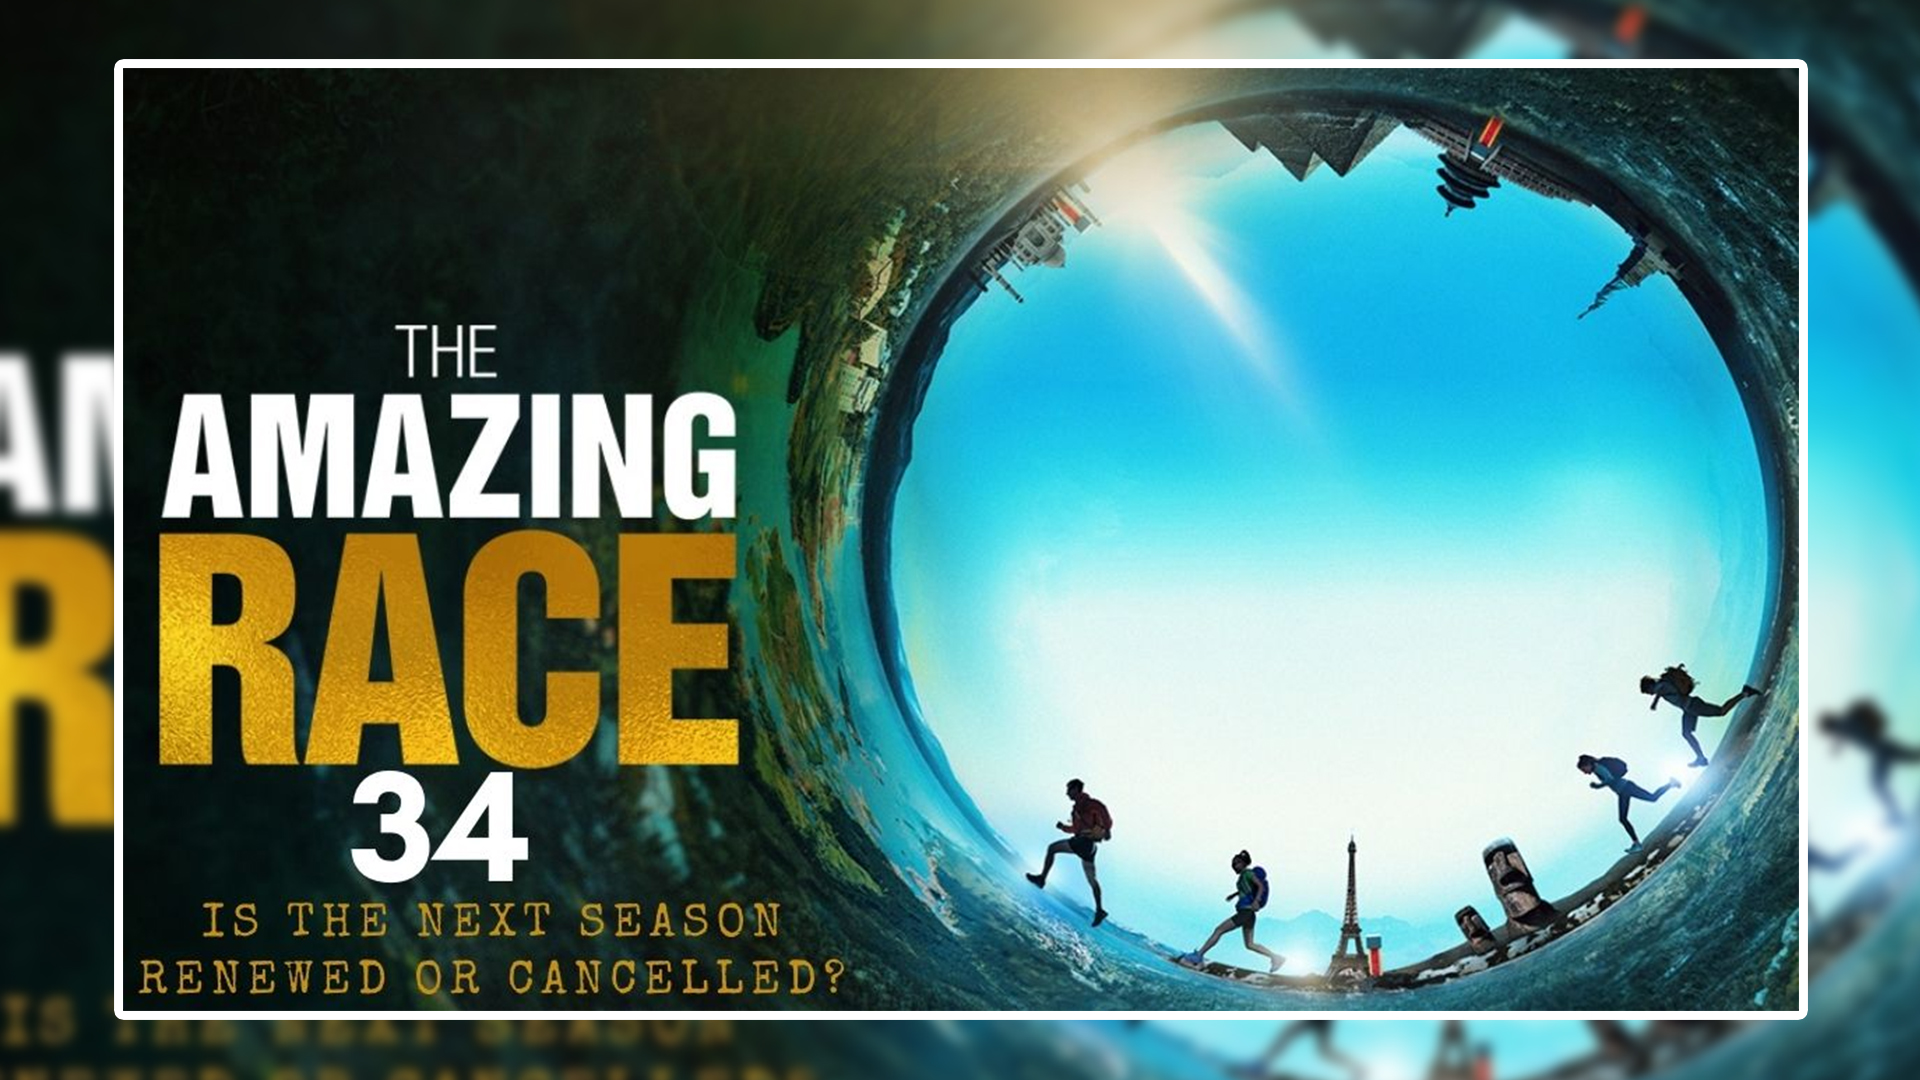 The Amazing Race Season 34 Is It Coming In August?